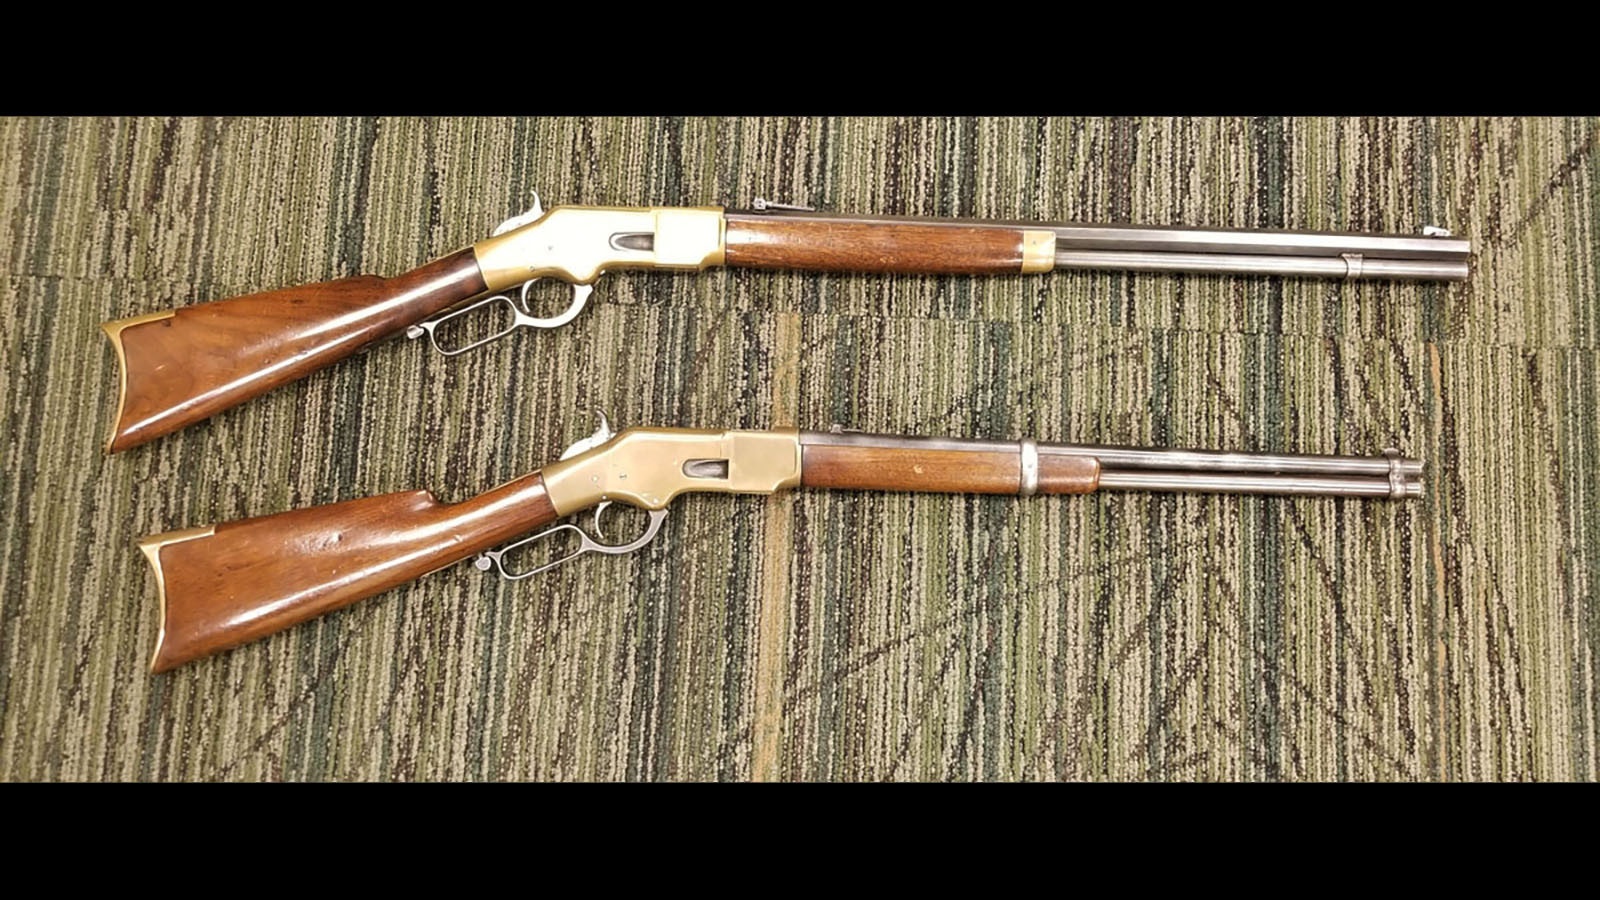 The Model 1866 Winchester, which chambered a .44-caliber rimfire cartridge, was the first true Winchester lever-action rifle. Nicknamed the “Yellow Boy” because of its brass receiver, shown here are two Model 1866s, one a full-length rifle, the other a shorter, lighter carbine.